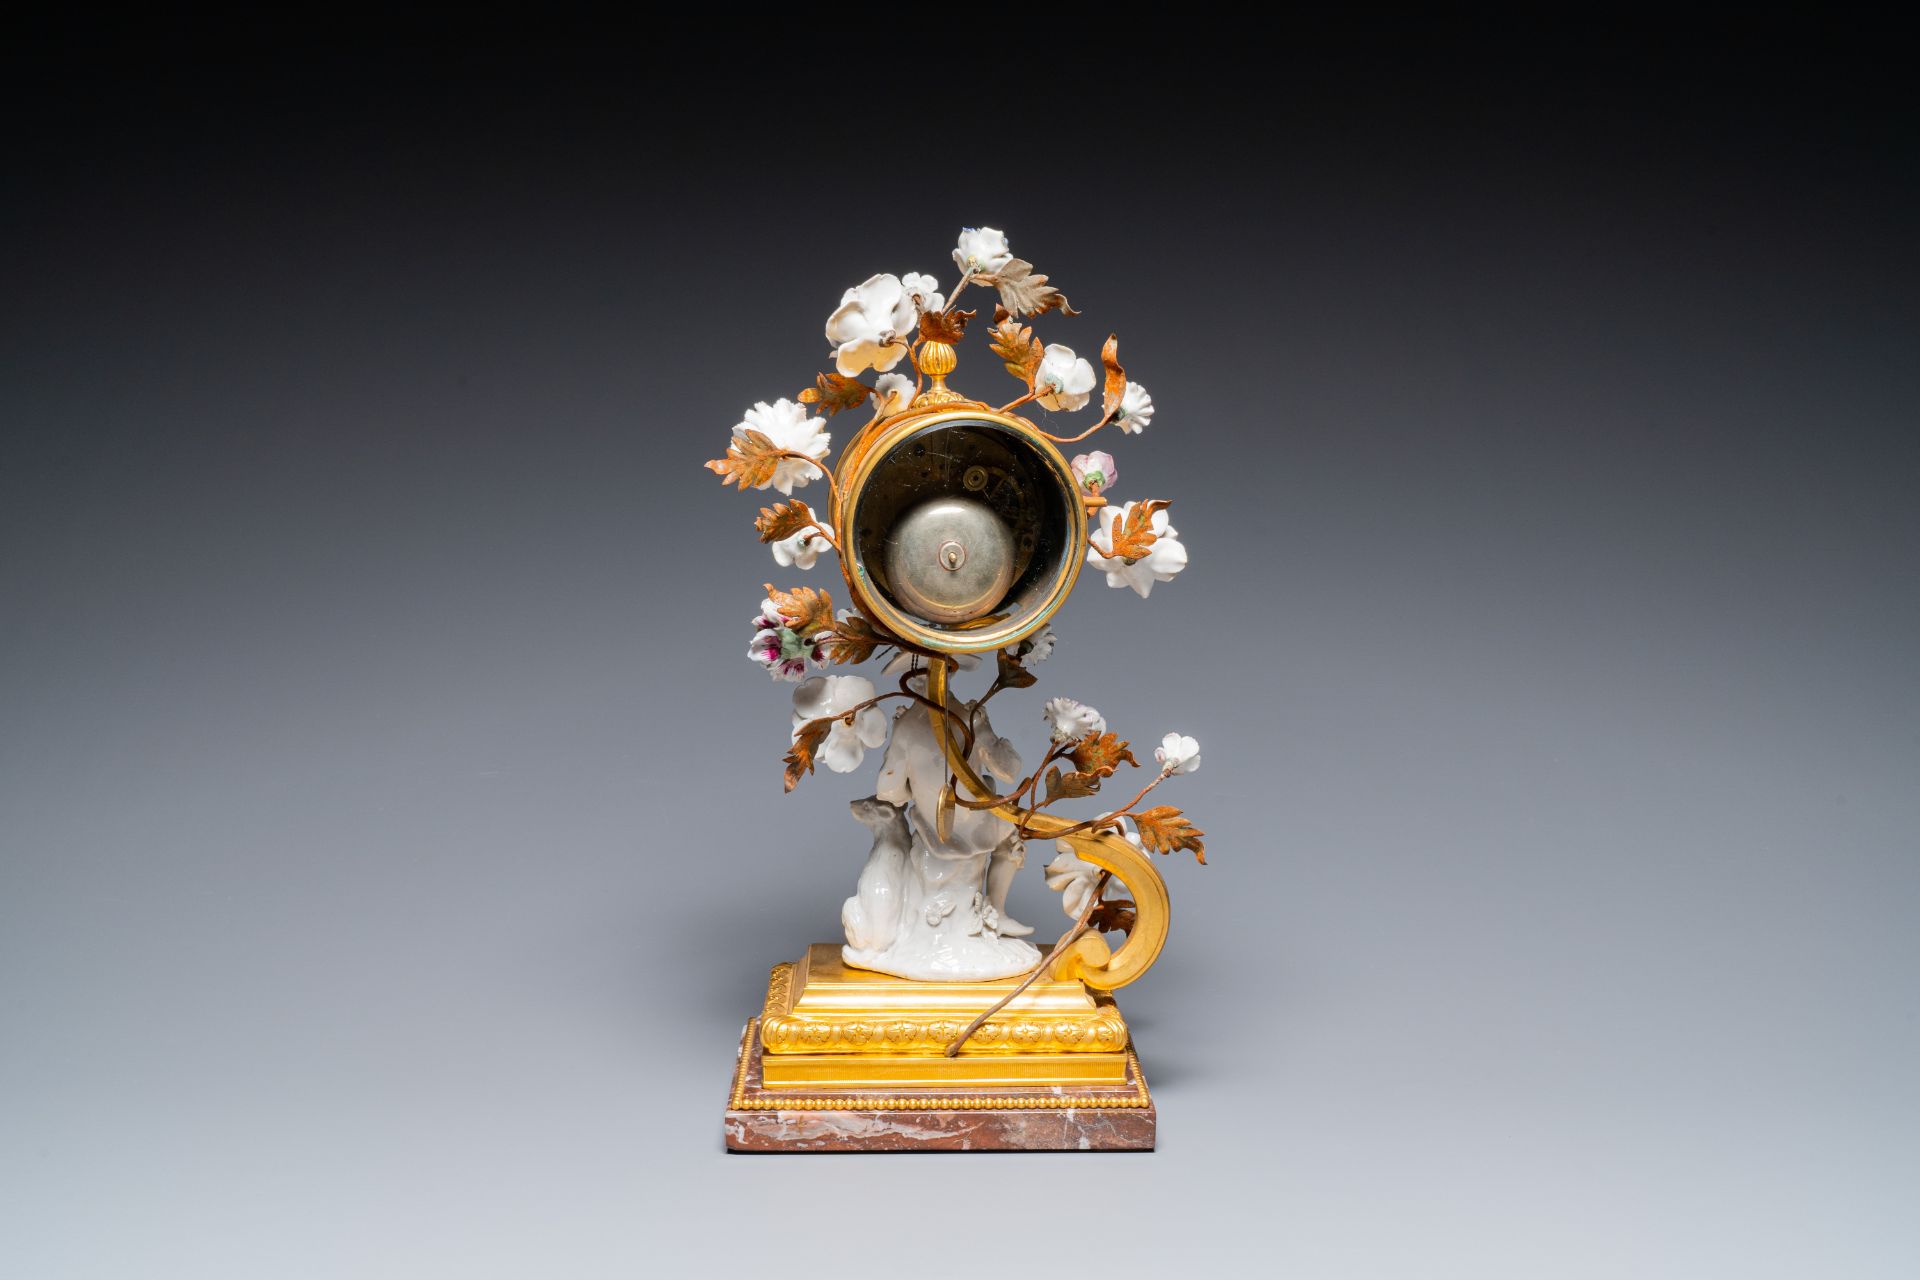 A French ormolu-mounted porcelain mantel clock, 18/19th C. - Image 9 of 28